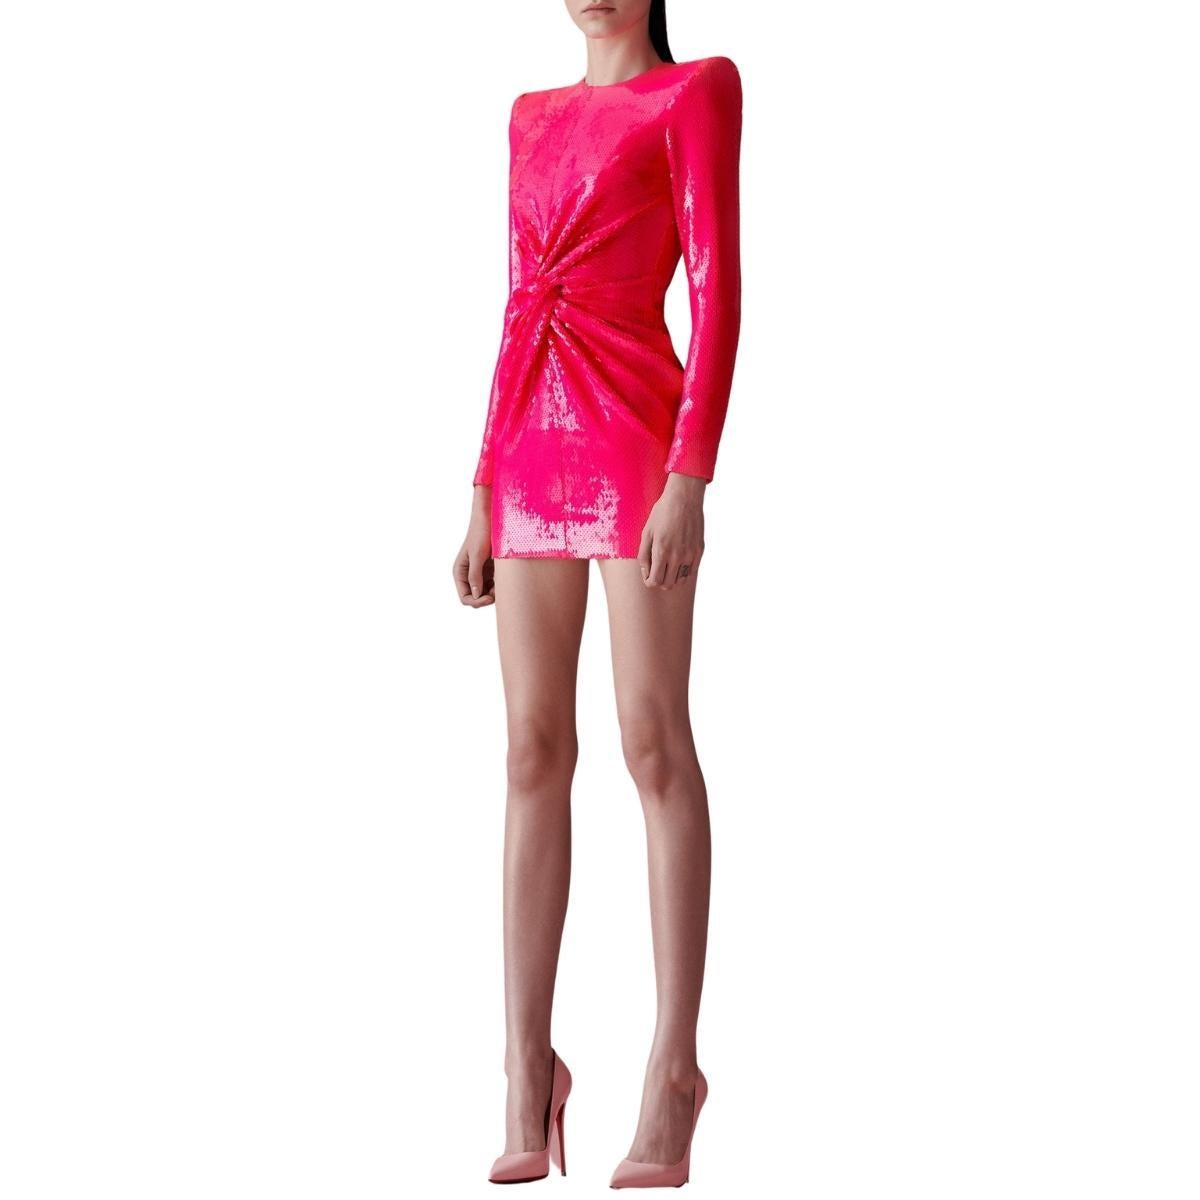 Follow us on Insta @runwaycatalog
Neon-pink Jade sequin-embellished structured mini dress
Sequin embroidery
Twisted detail
Round neck
Long sleeves
Structured shoulders
Straight hem
Back zip fastening
Satin lining
Composition: 100% Polyester
Lining: